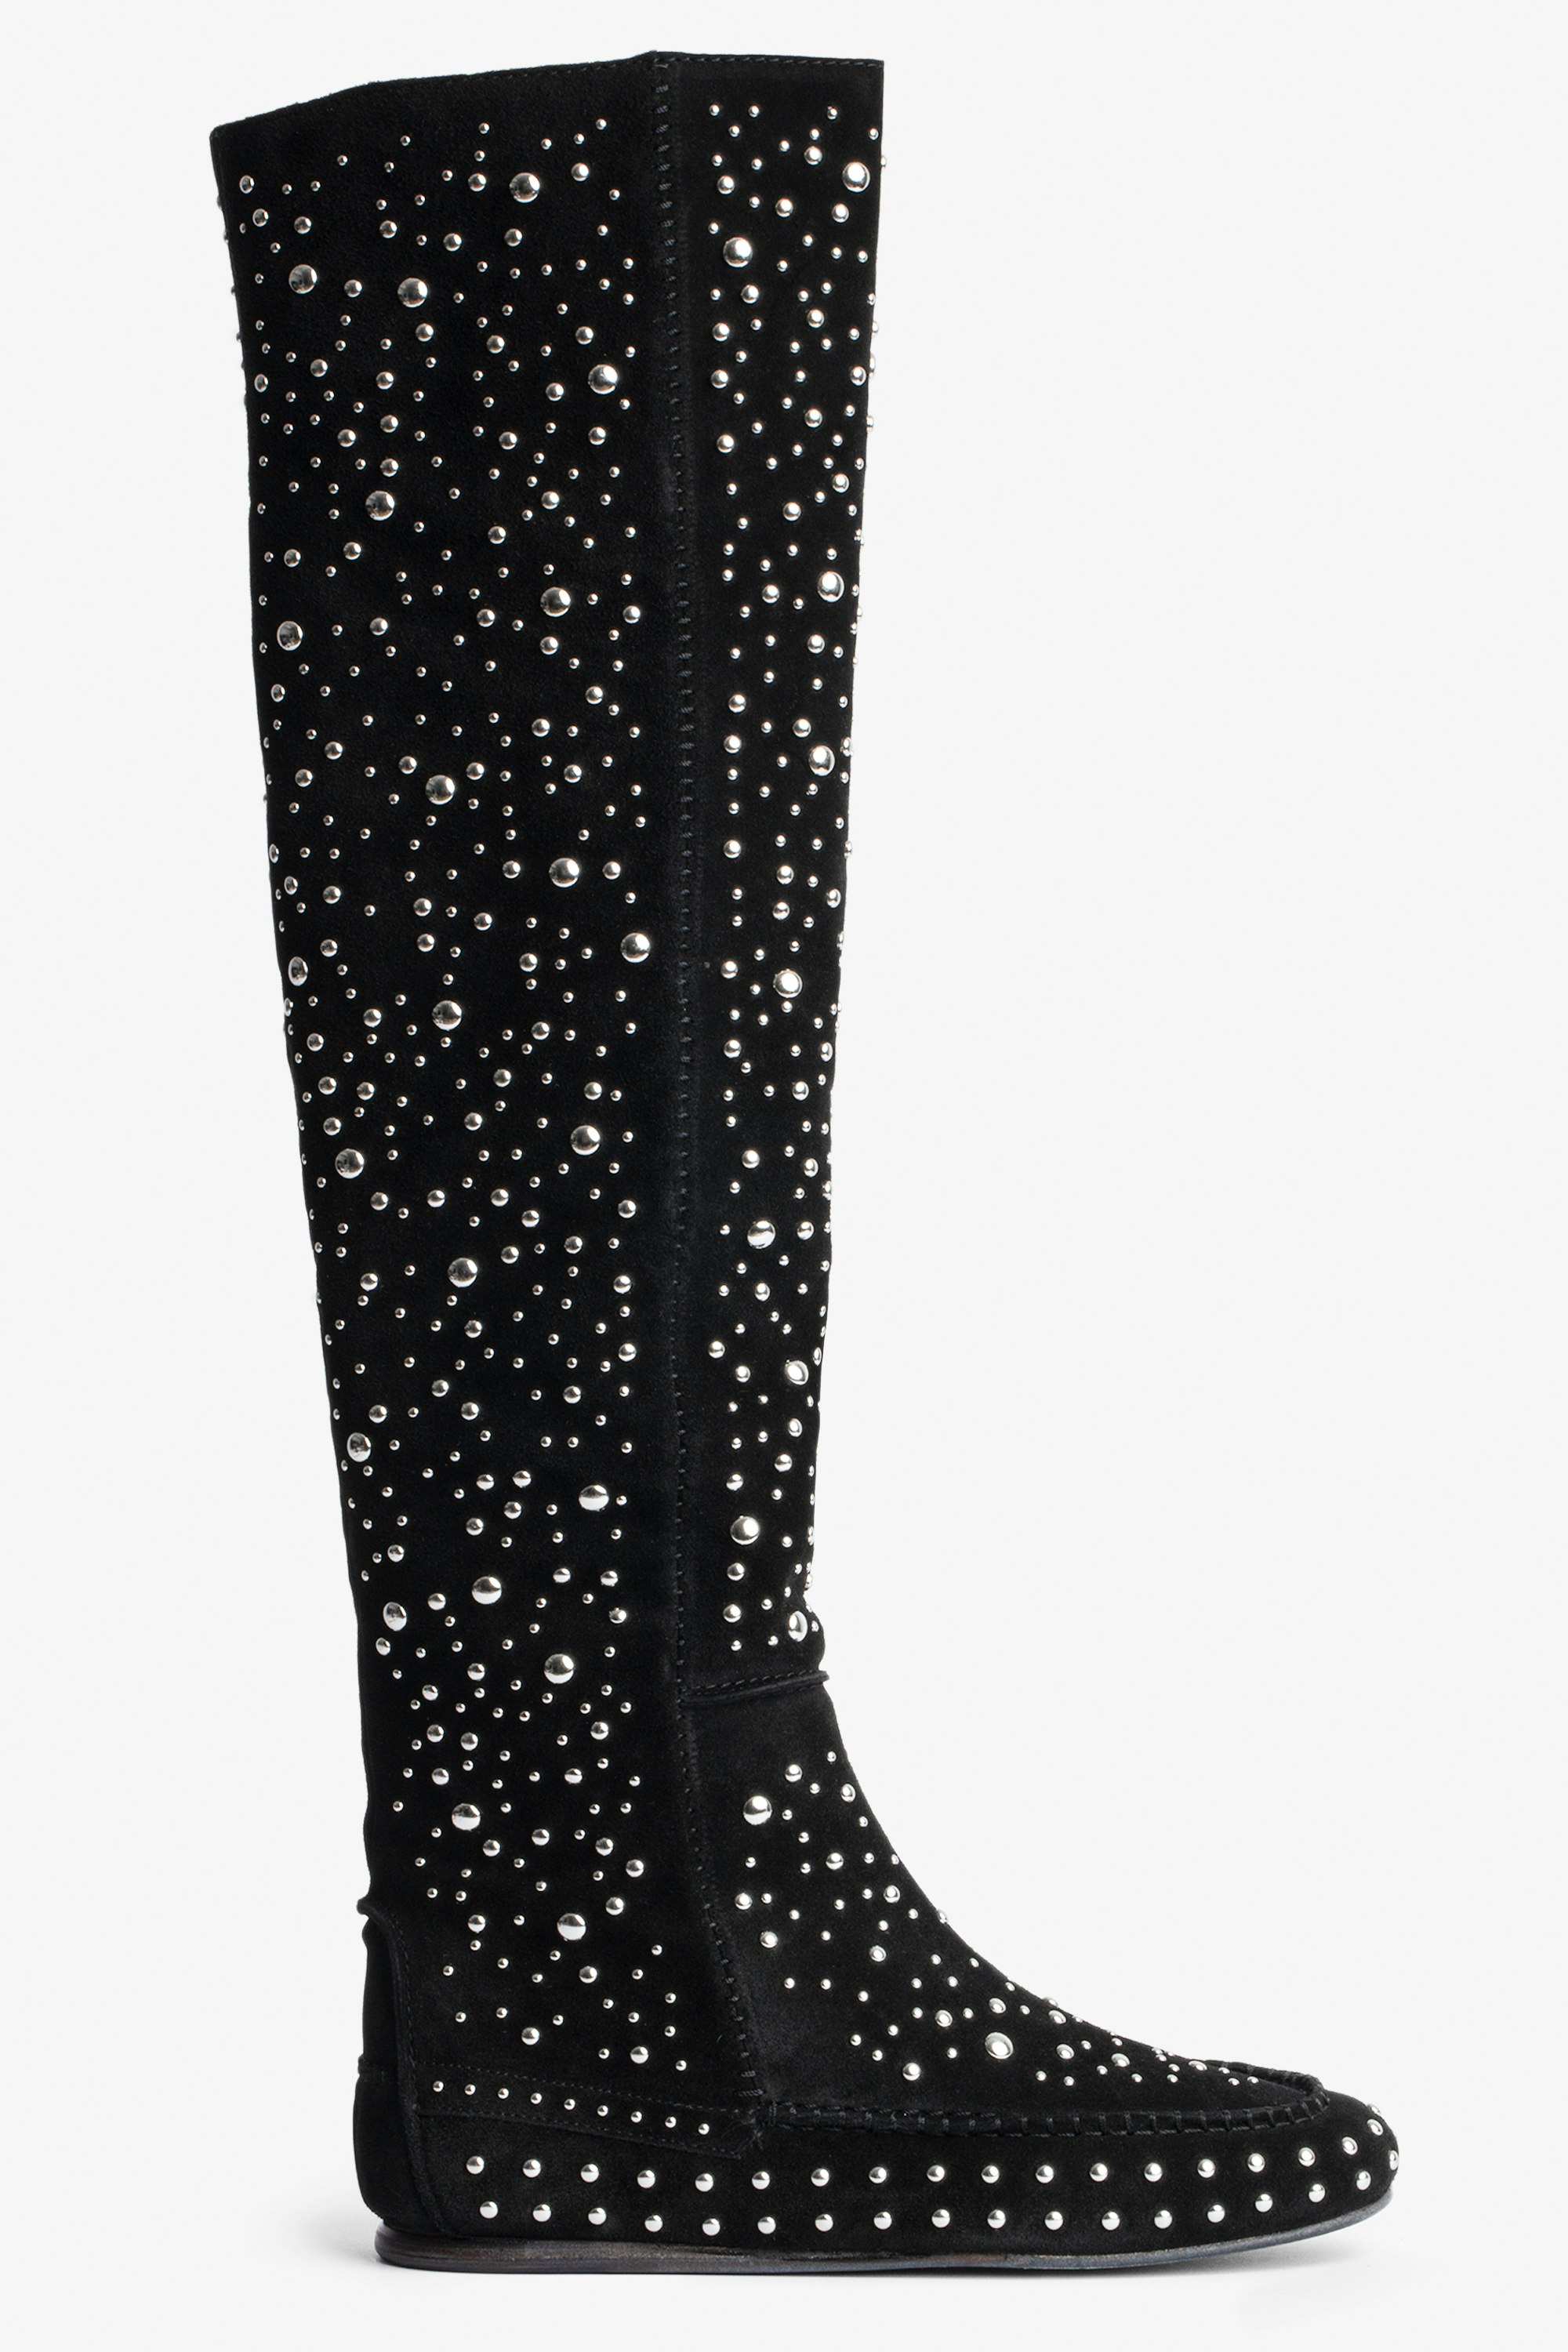 Santa Boots Women’s black suede knee-high boots with silver-tone studs and topstitching